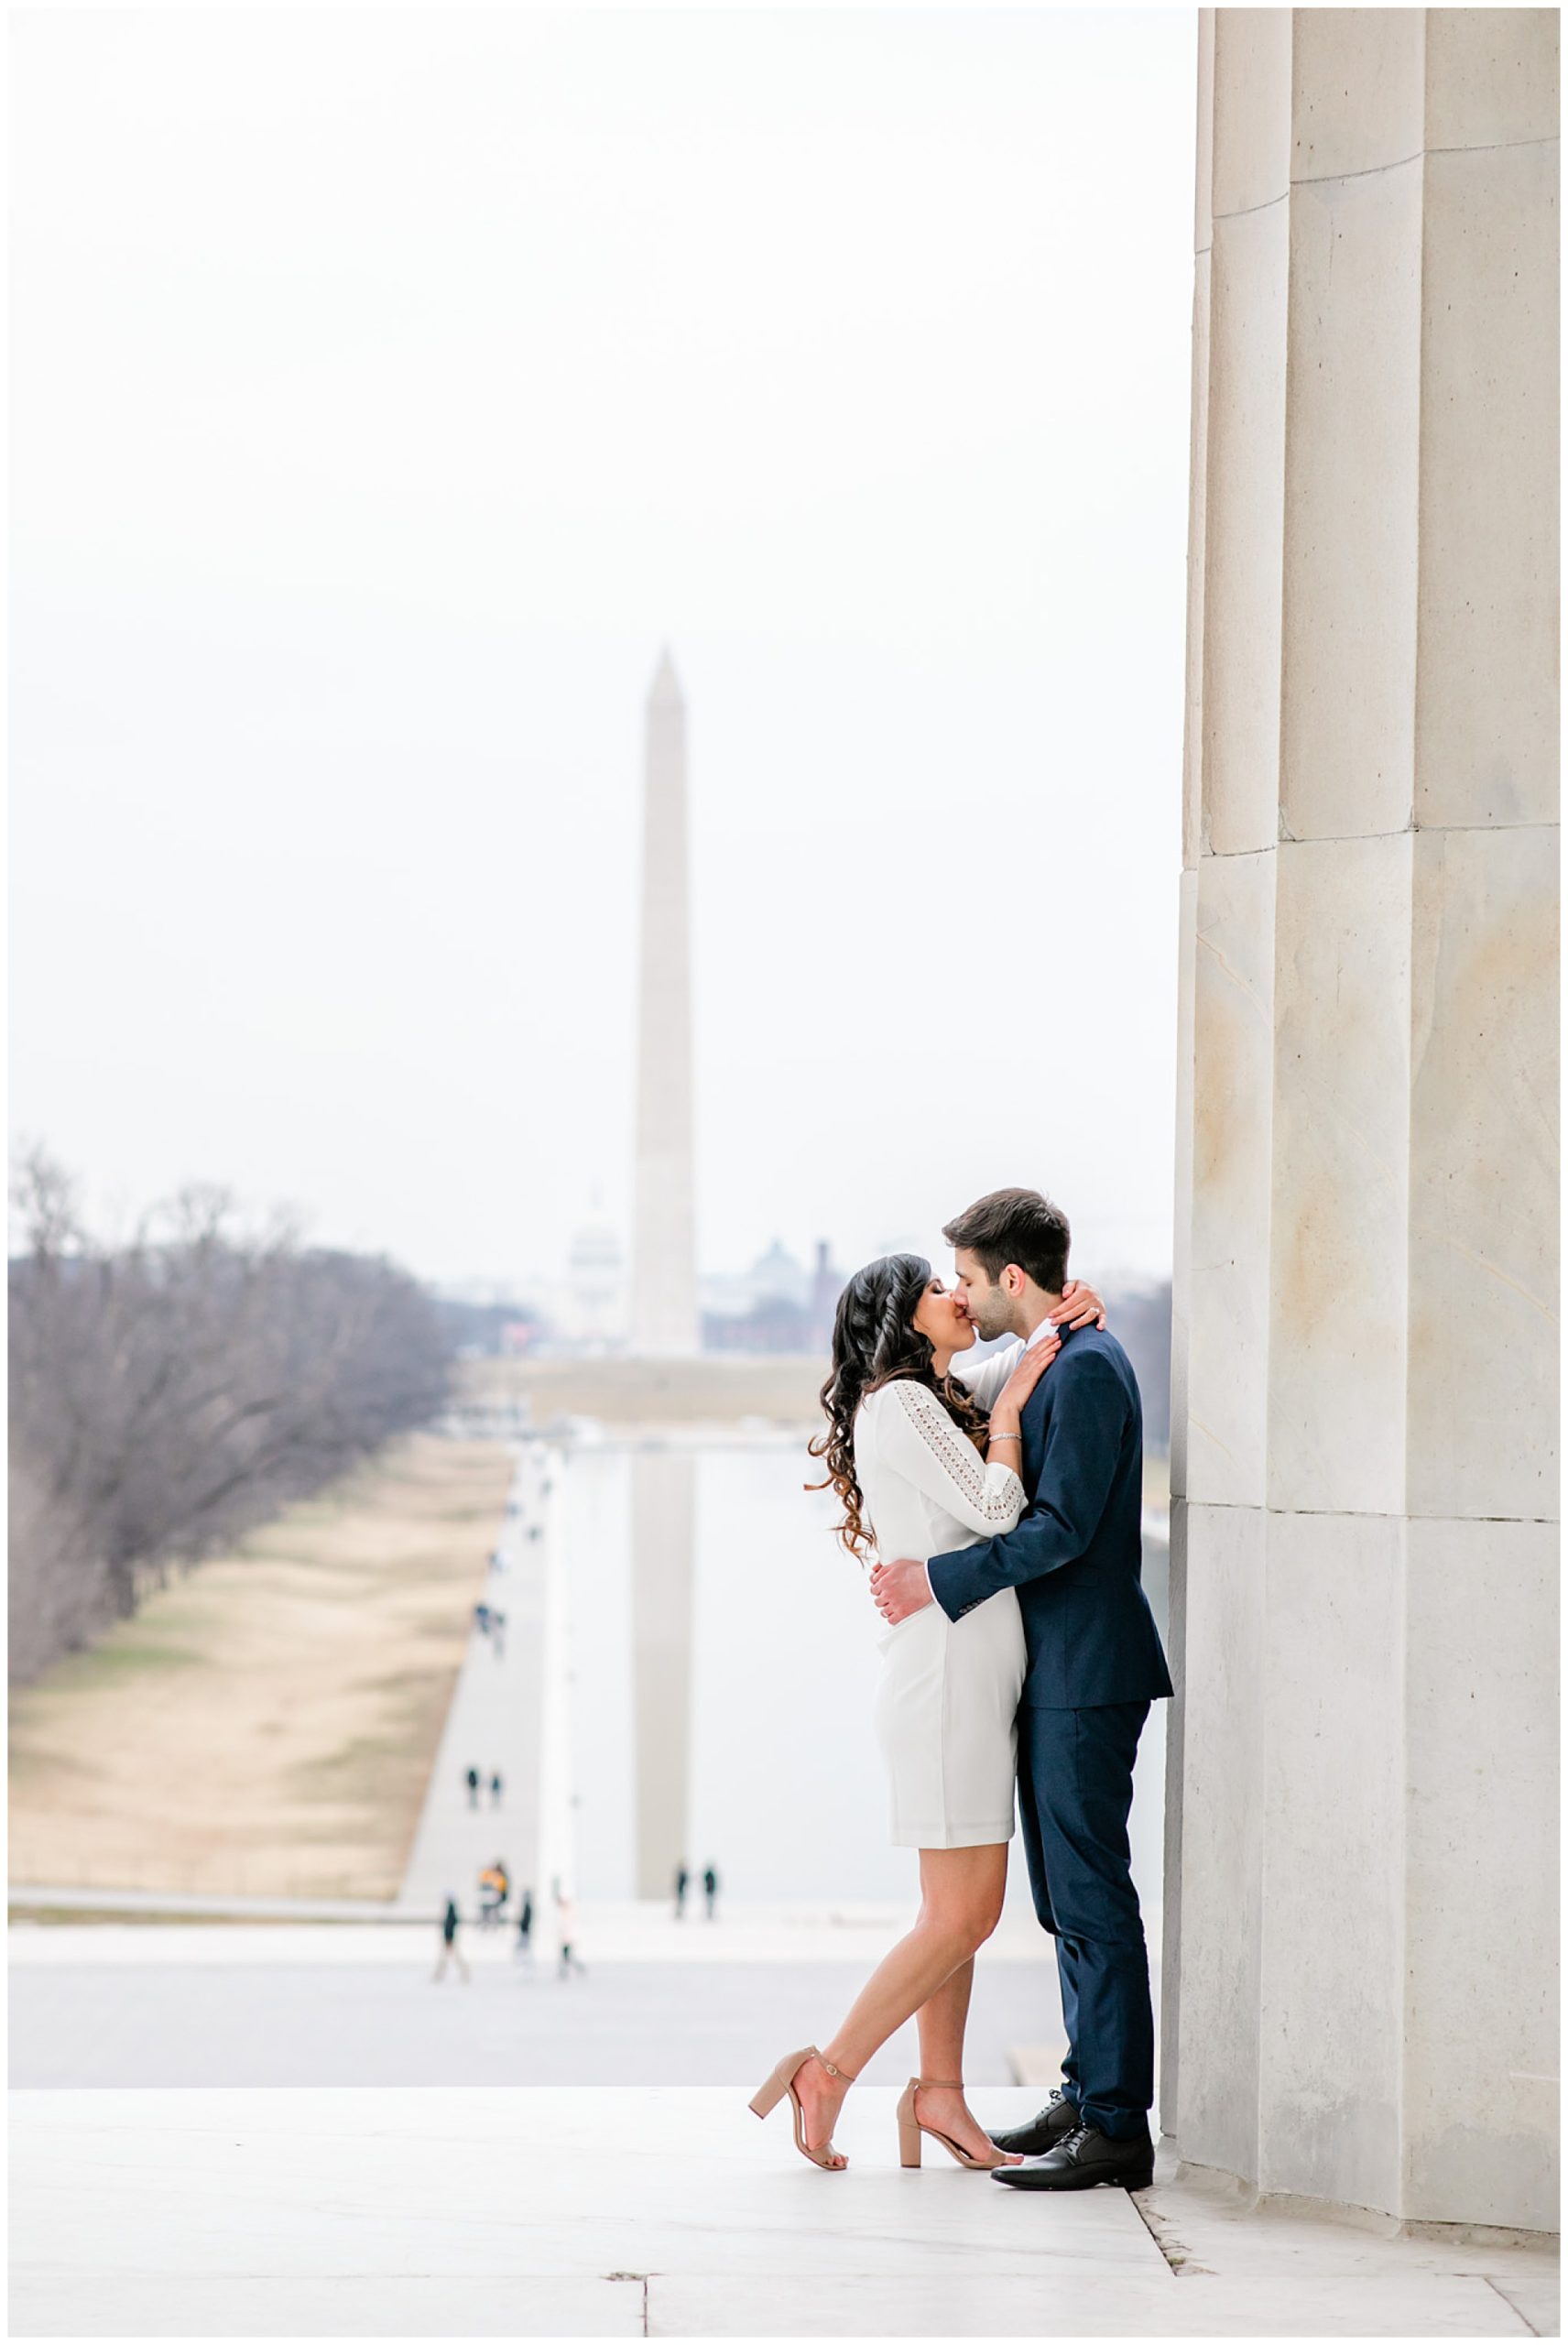 winter National Mall elopement, DC elopement, DC elopement photographer, DC wedding photographer, DC wedding portraits, National mall portraits, National Mall elopement, Rachel E.H. Photography, Capitol Hill, newlywed portraits, Lincoln Memorial portraits, Washington Monument